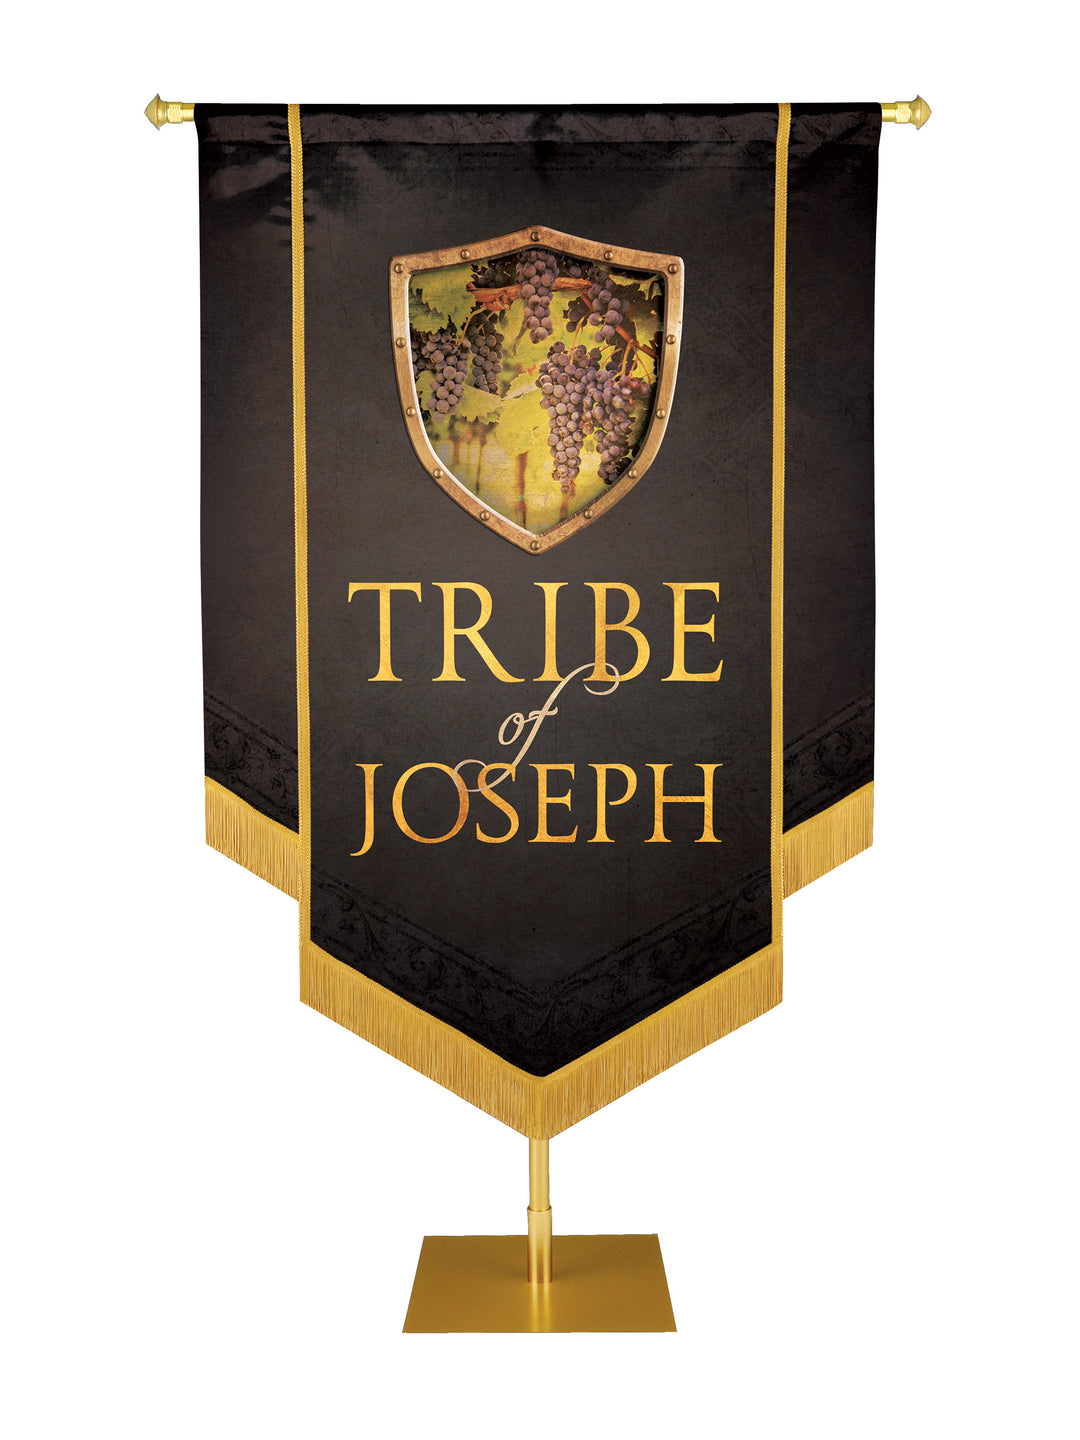 Tribe of Joseph Embellished Banner - Handcrafted Banners - PraiseBanners